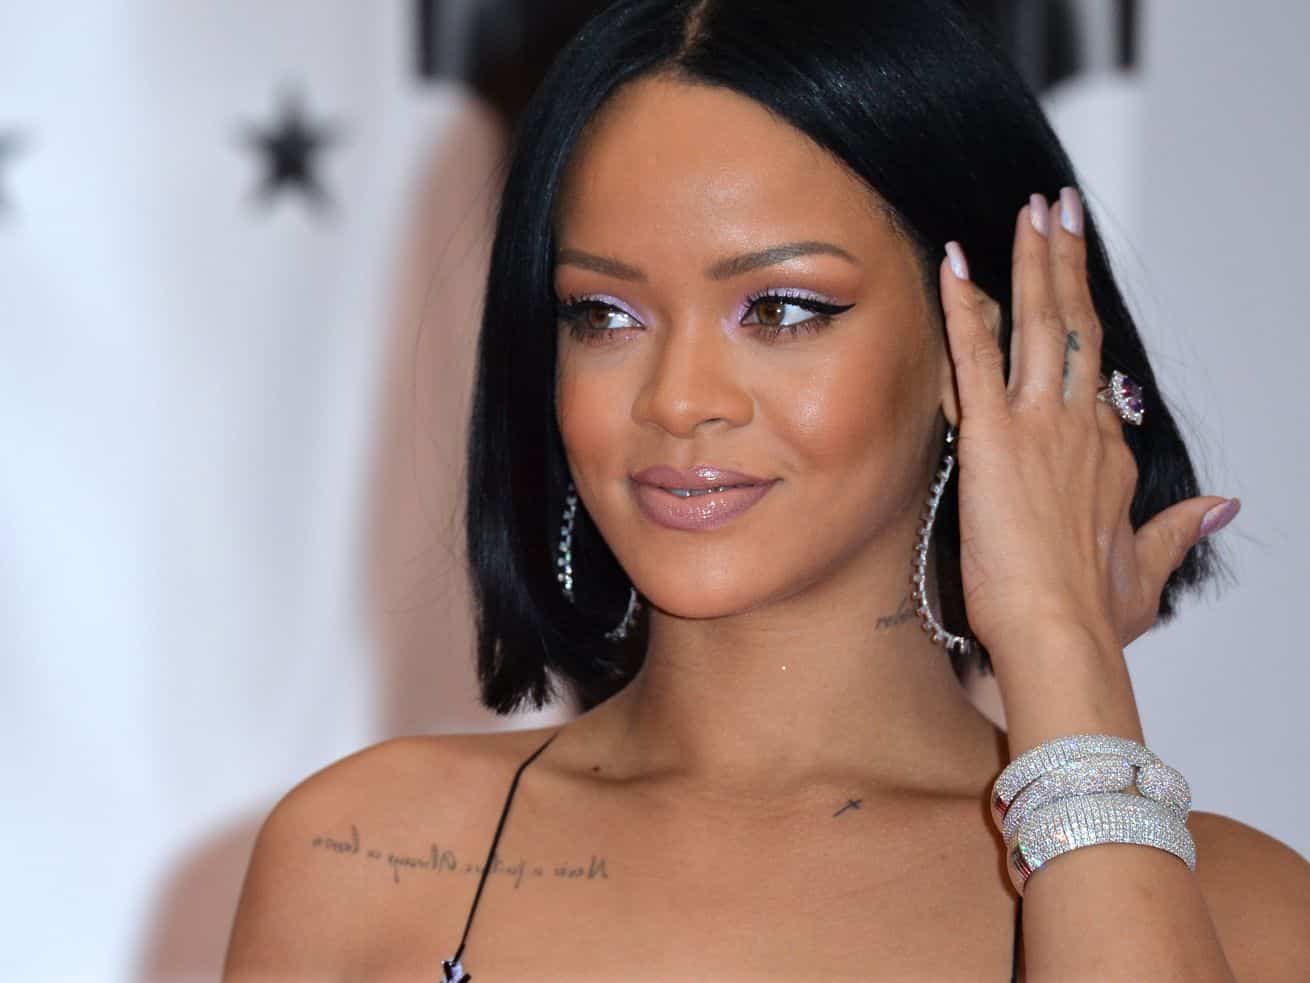 Why the Indian government is mad at Rihanna